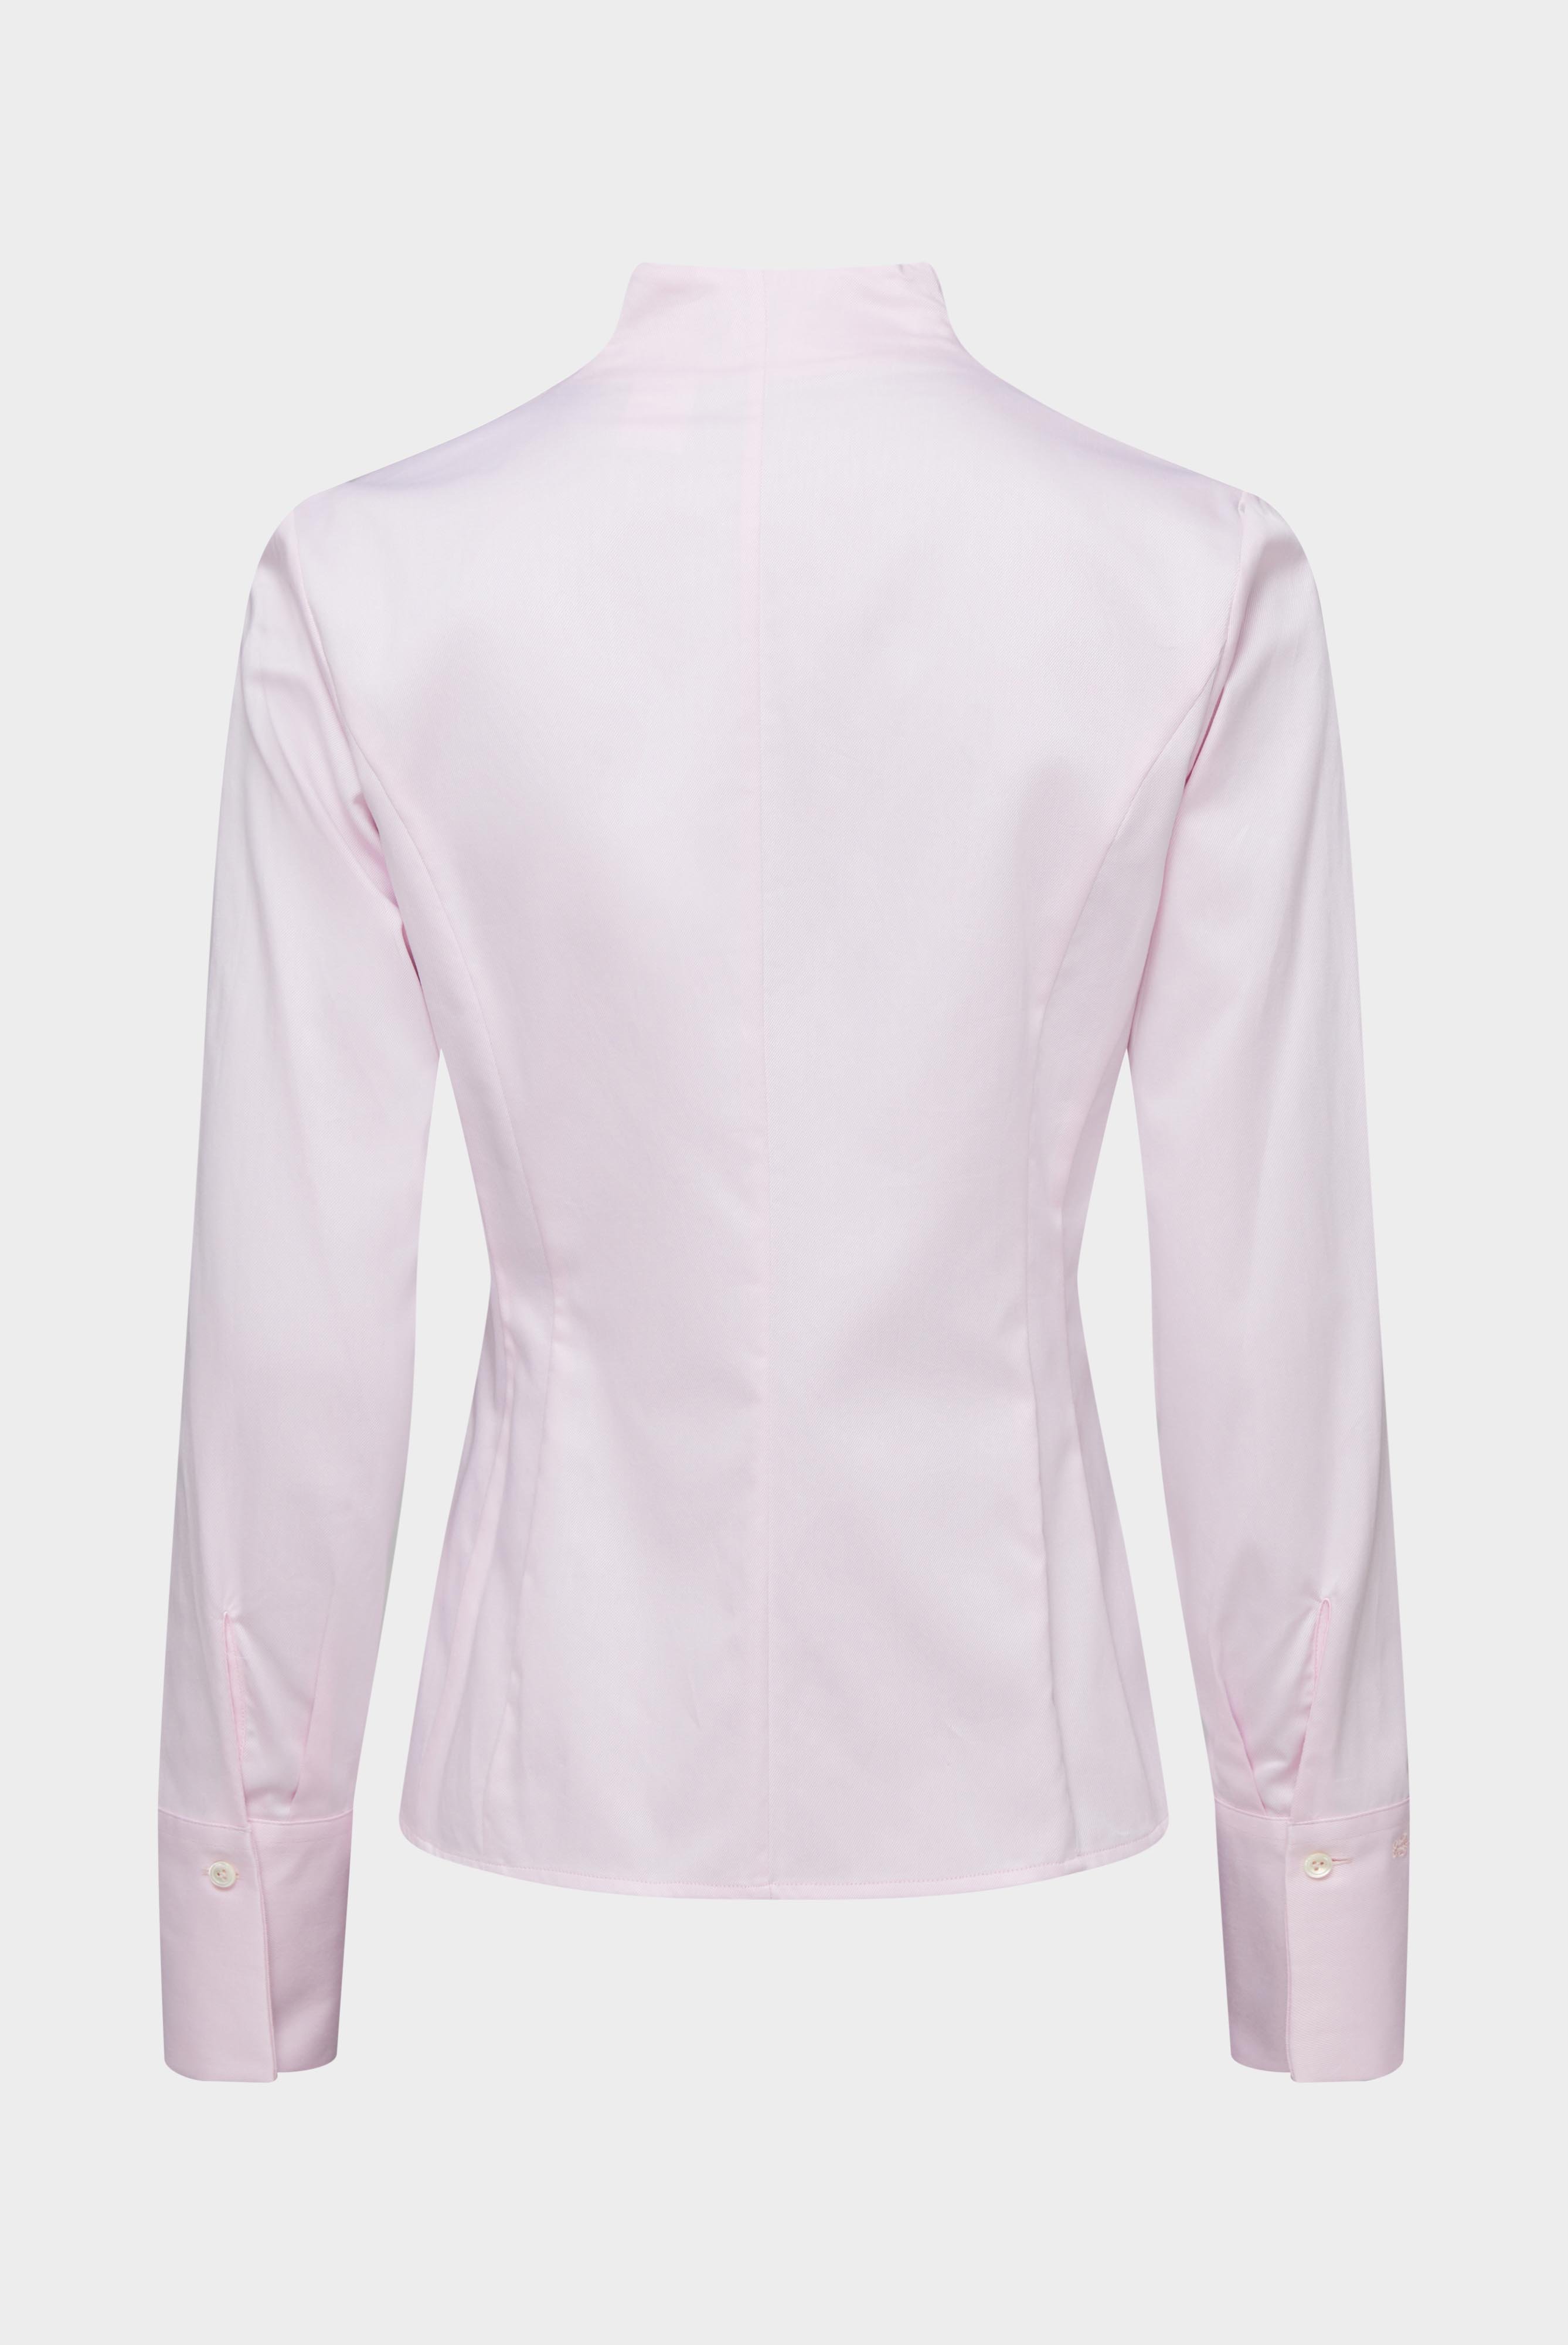 Business Blouses+Twill Chalice Collar Blouse+05.3612.73.130148.520.32